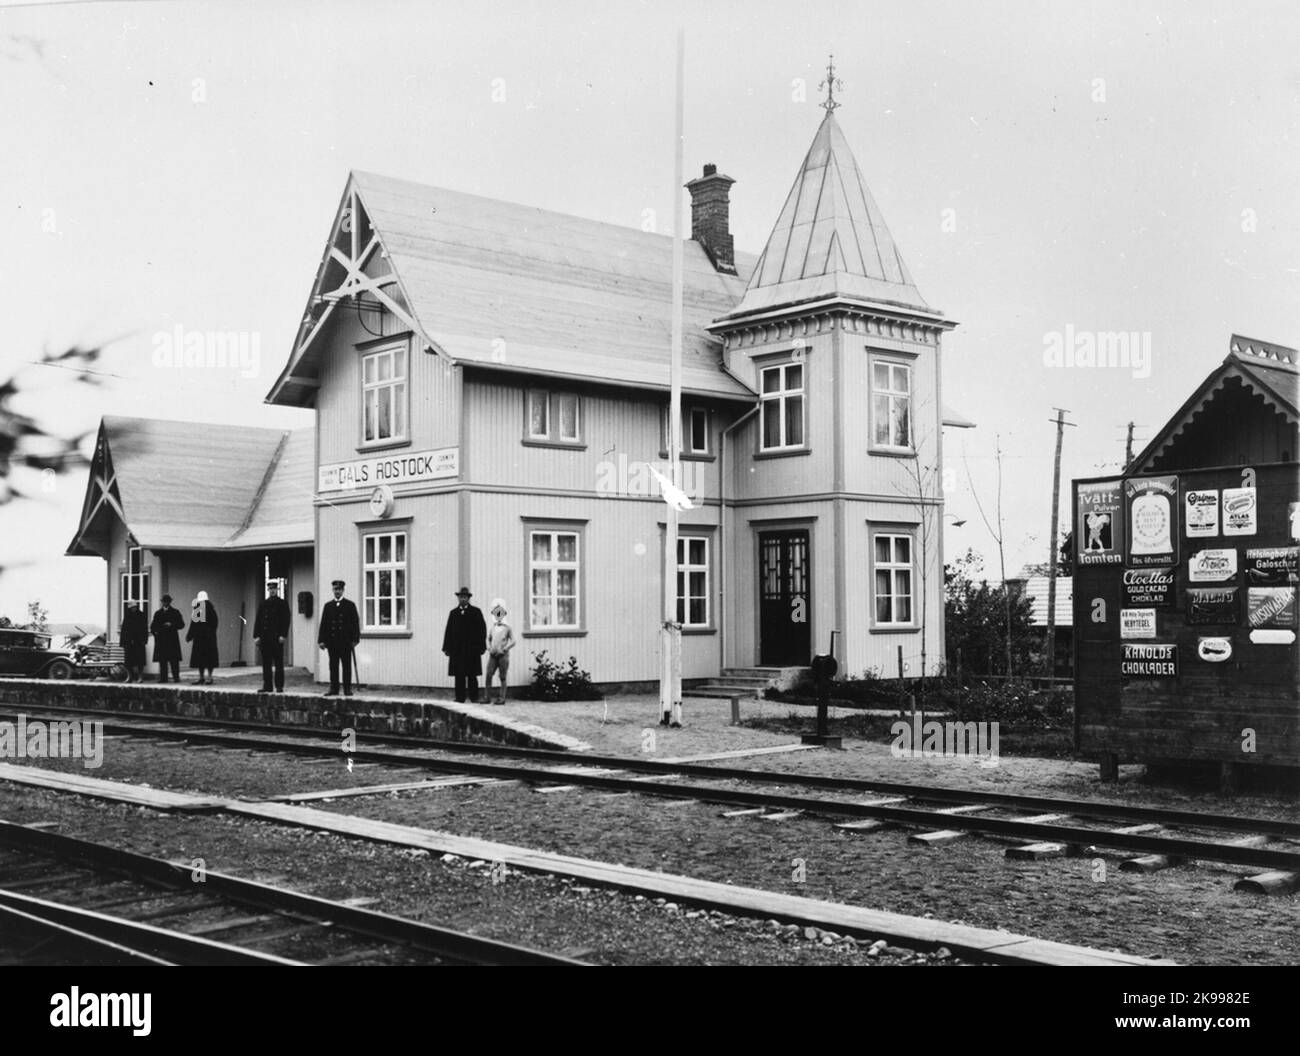 The railway station in Dals-Rostock. The side building on the left was used at the original stop in Rostock, built in 1884, and was originally located above Rostock's well. Later, the building was transported down to the place where the Dals-Rostock railway station was erected in 1908, and was then expanded to station houses. In 1941 the station house was demolished and replaced with a new one. Today, in Dals-Rostock, there is a model in scale 1: 2 of the original station house. Advertising: Lagerman's washing powder Santa; Malmö Stora Walsqvarn; Gripen Velocipeder; Atlas rubber rings; Puch mo Stock Photo